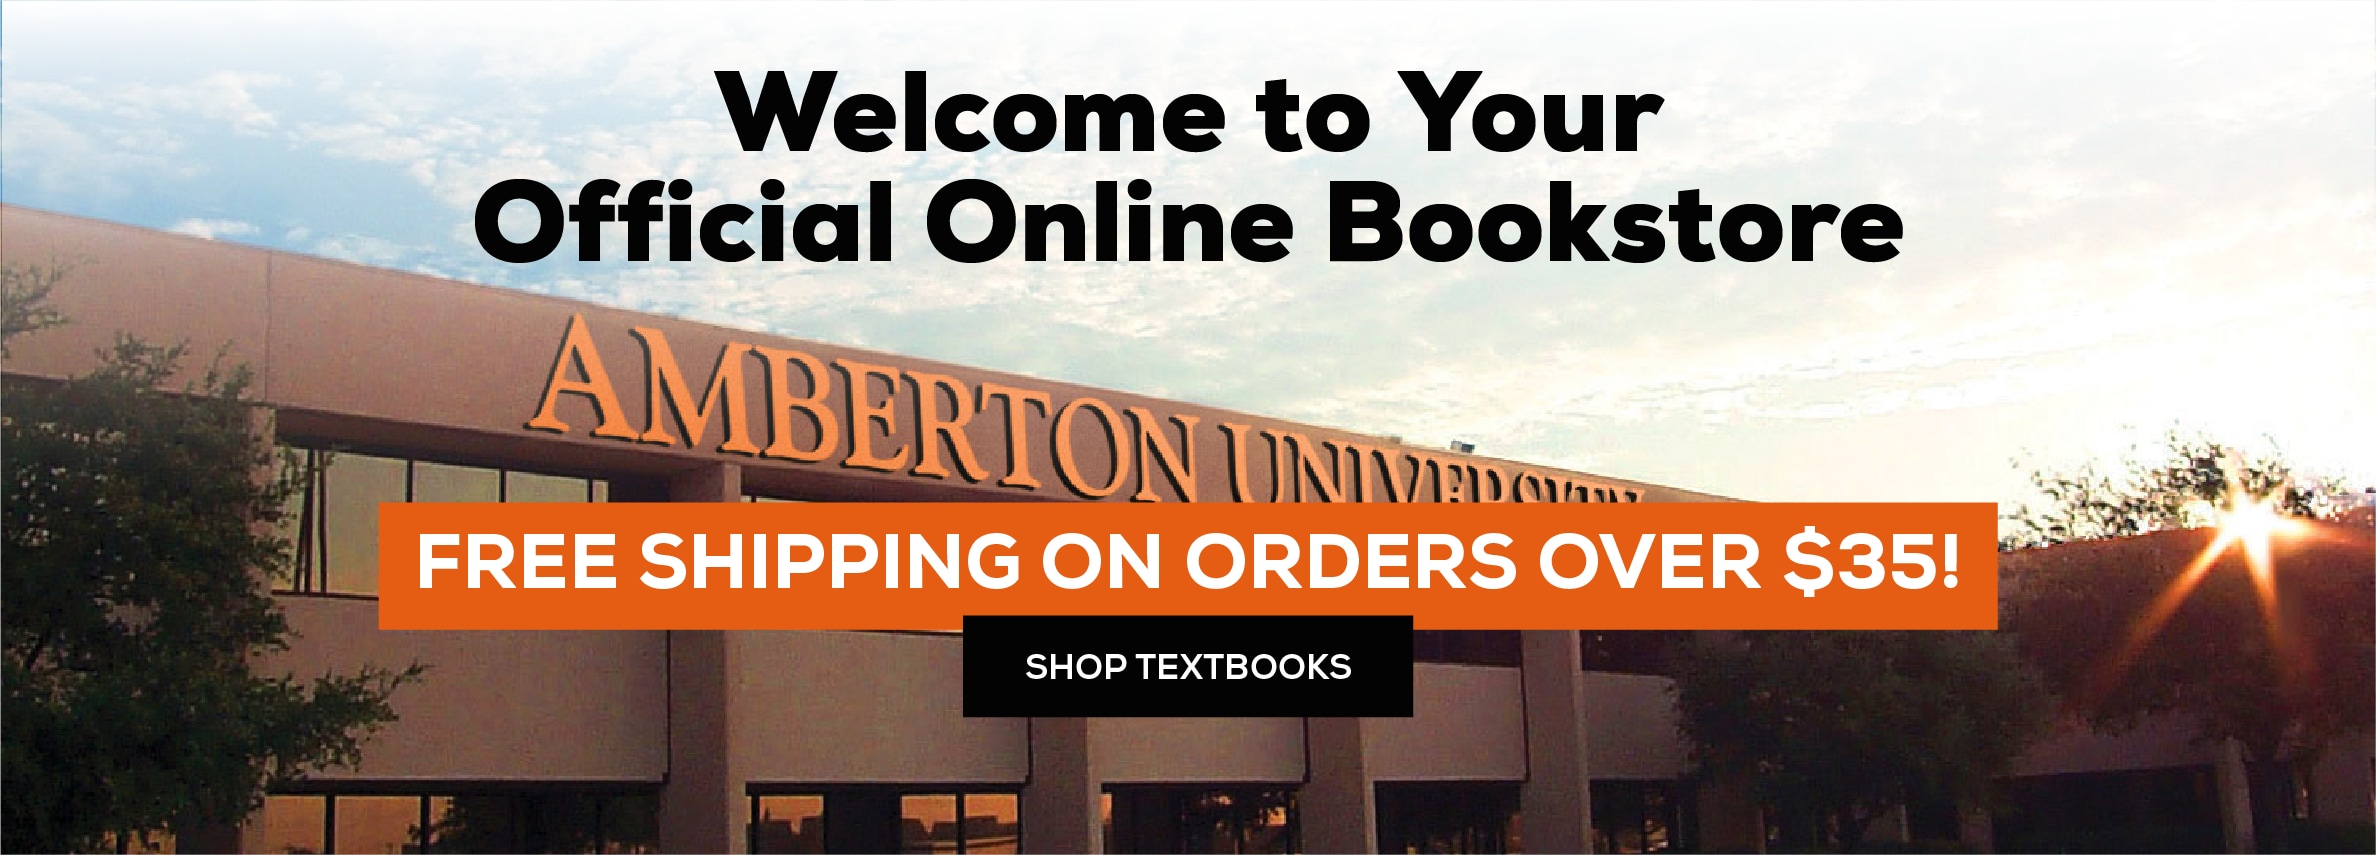 Welcome to your official online bookstore. Free shipping on all orders over $35! Shop textbooksNew Hero Image